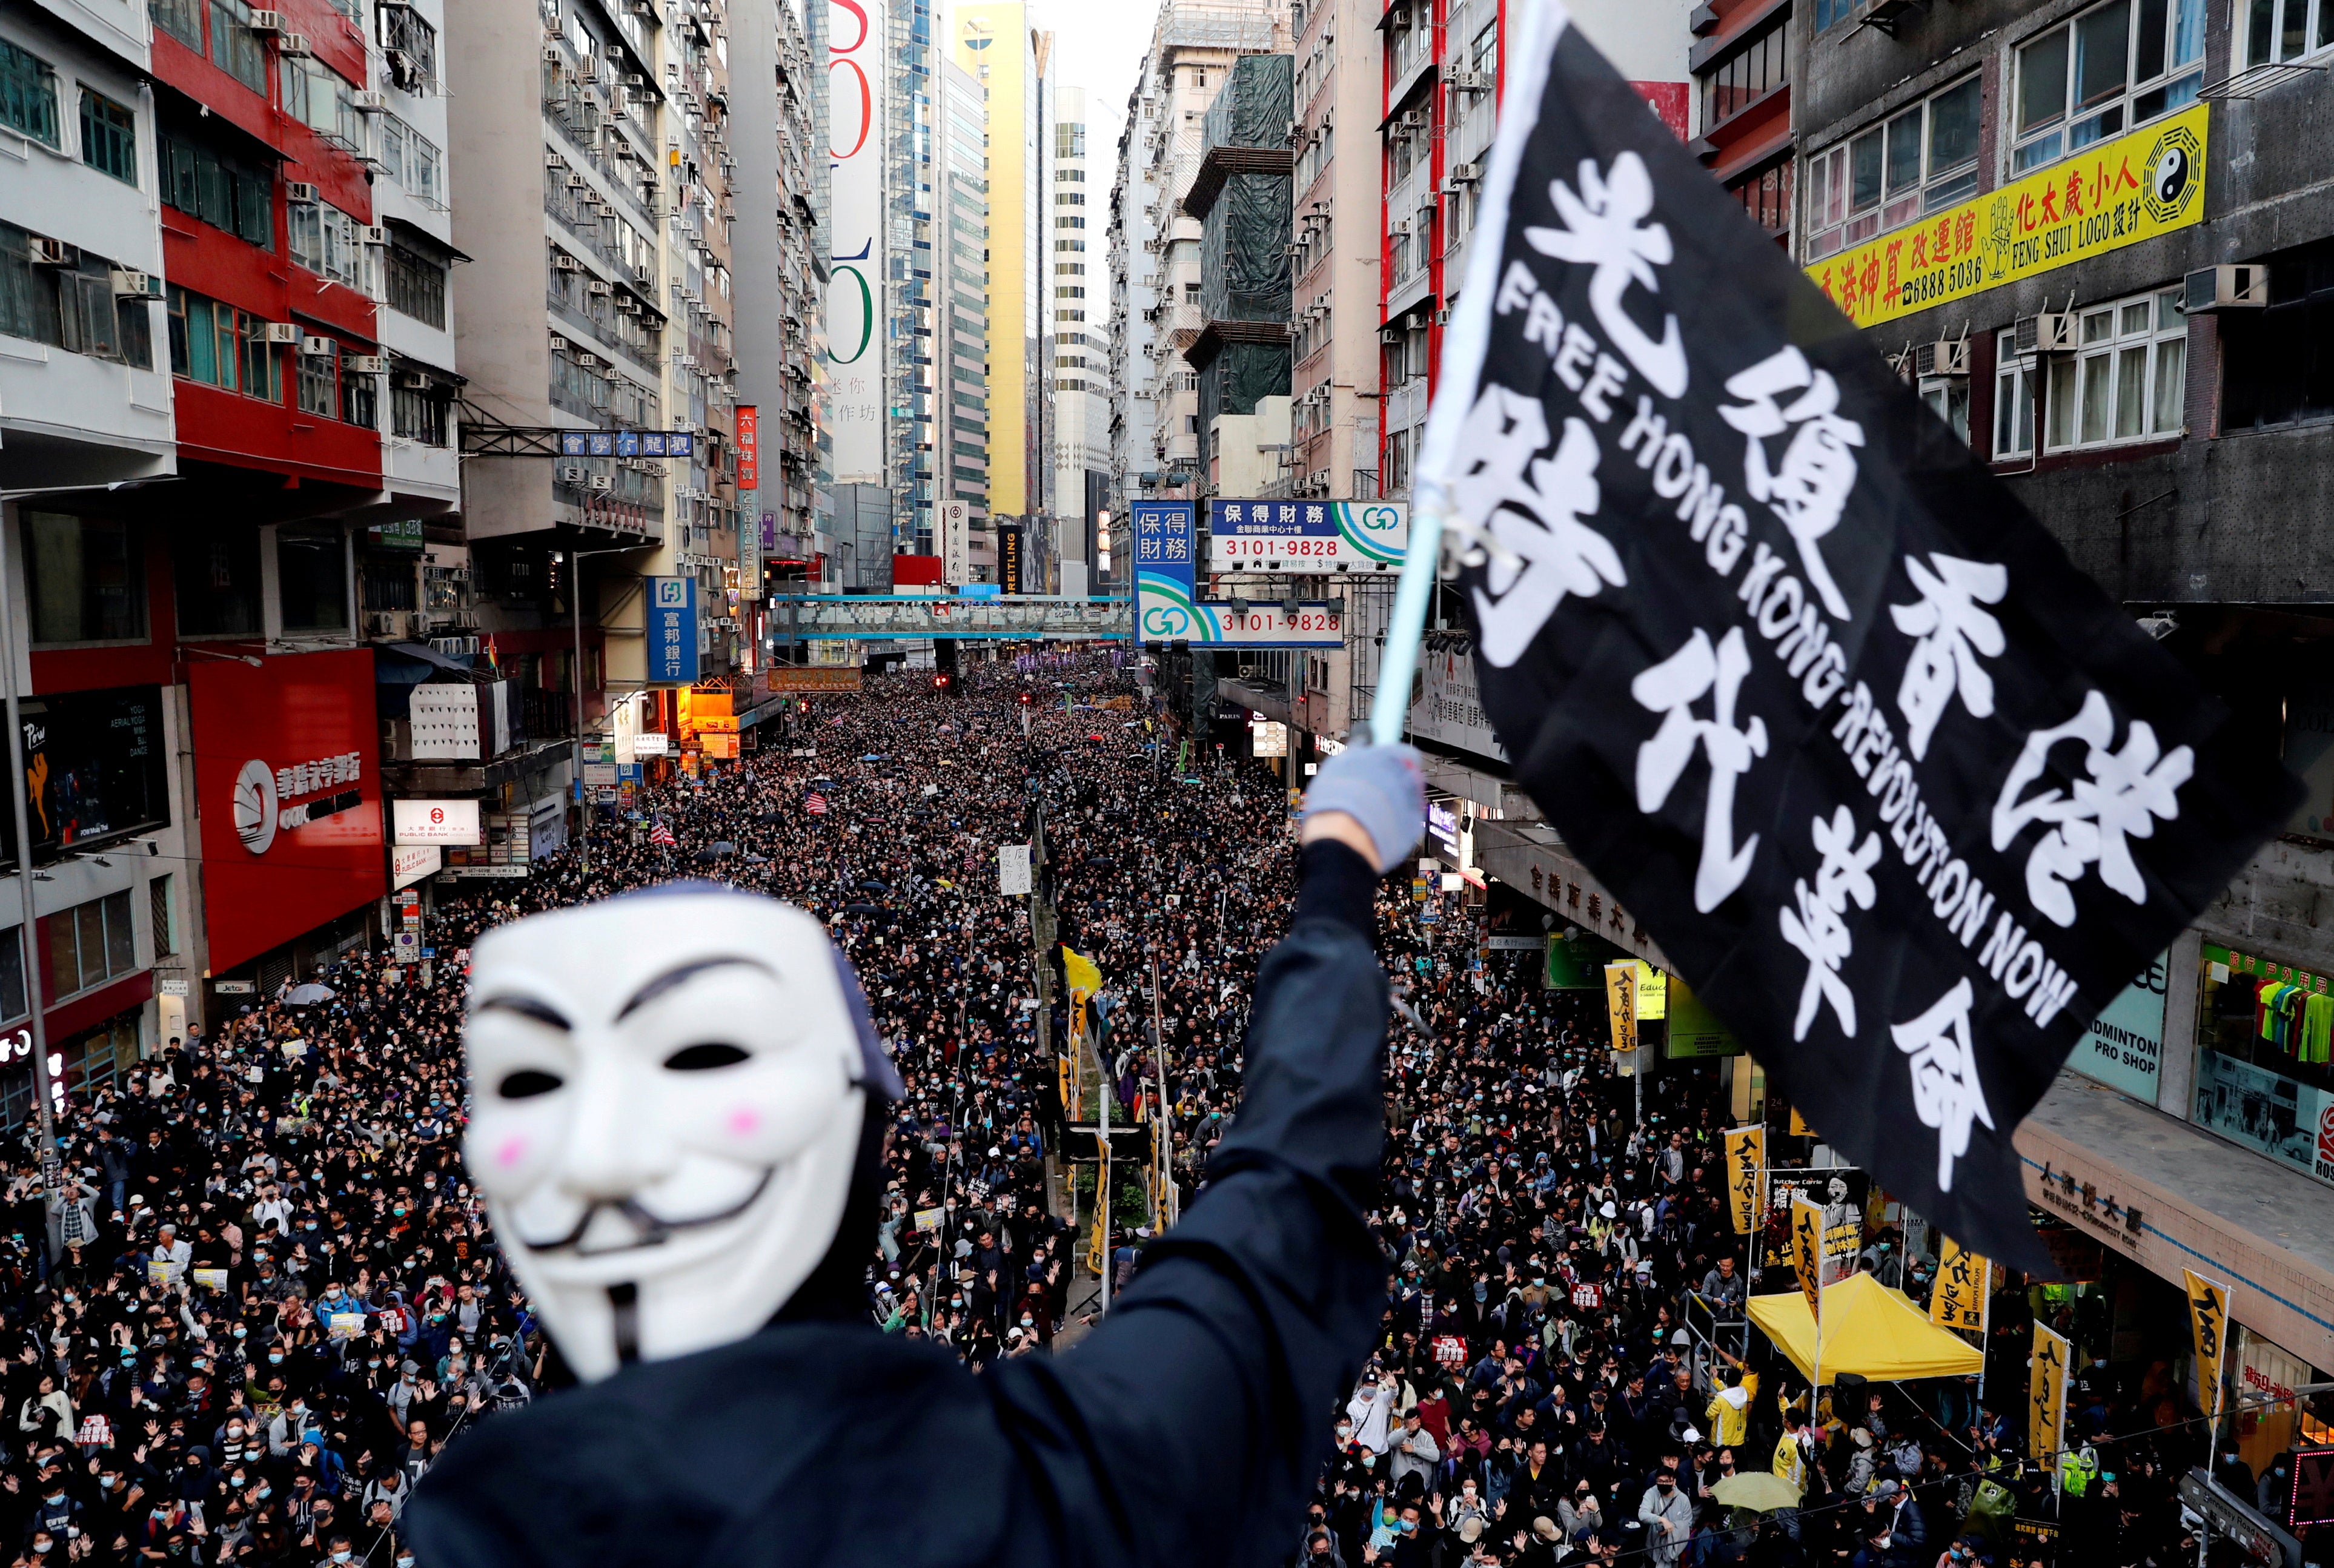 Pro-democracy protesters march for human rights in Hong Kong in 2019